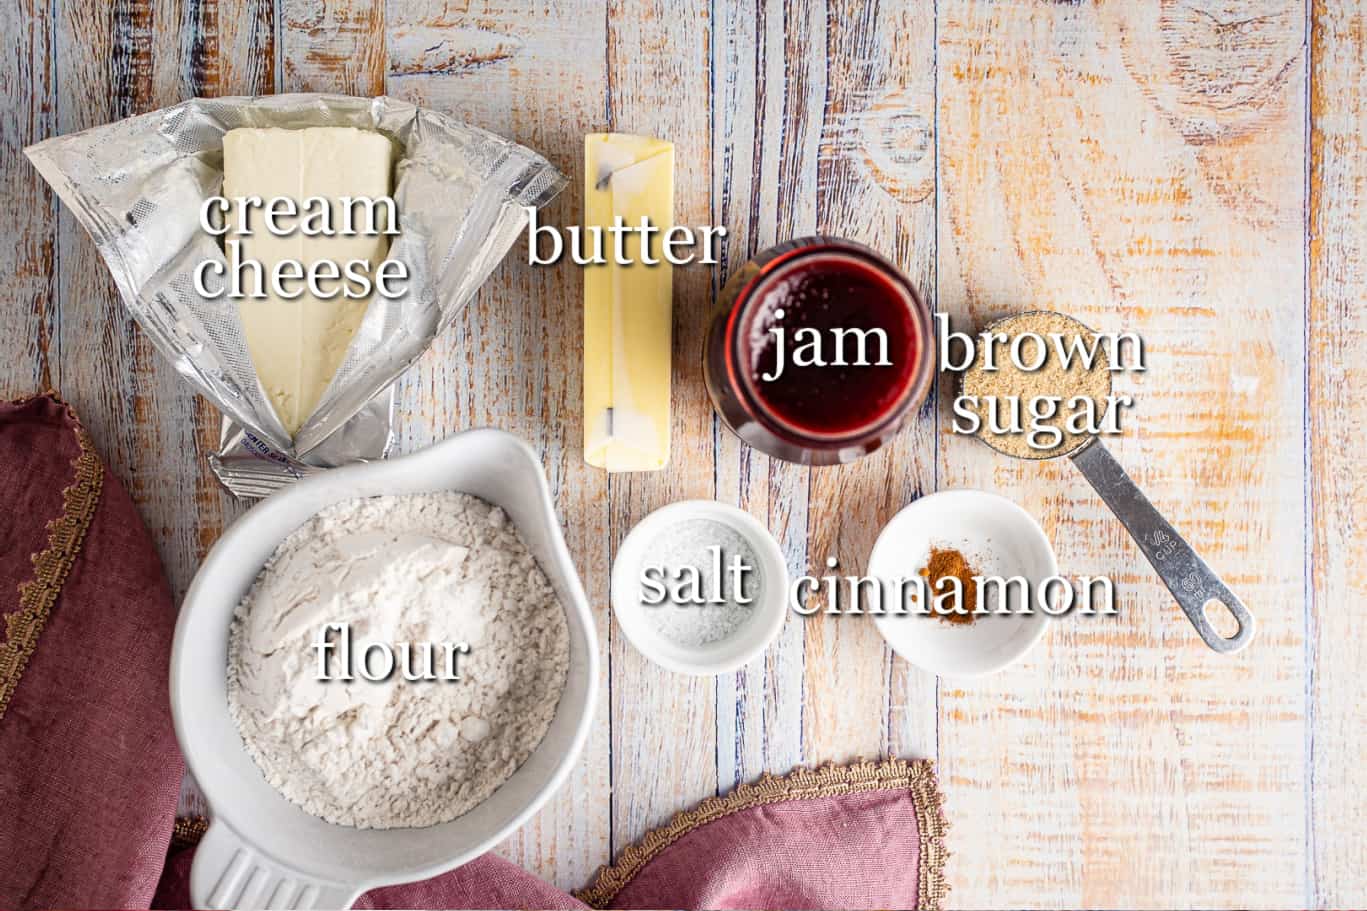 Raspberry tart ingredients with text labels.